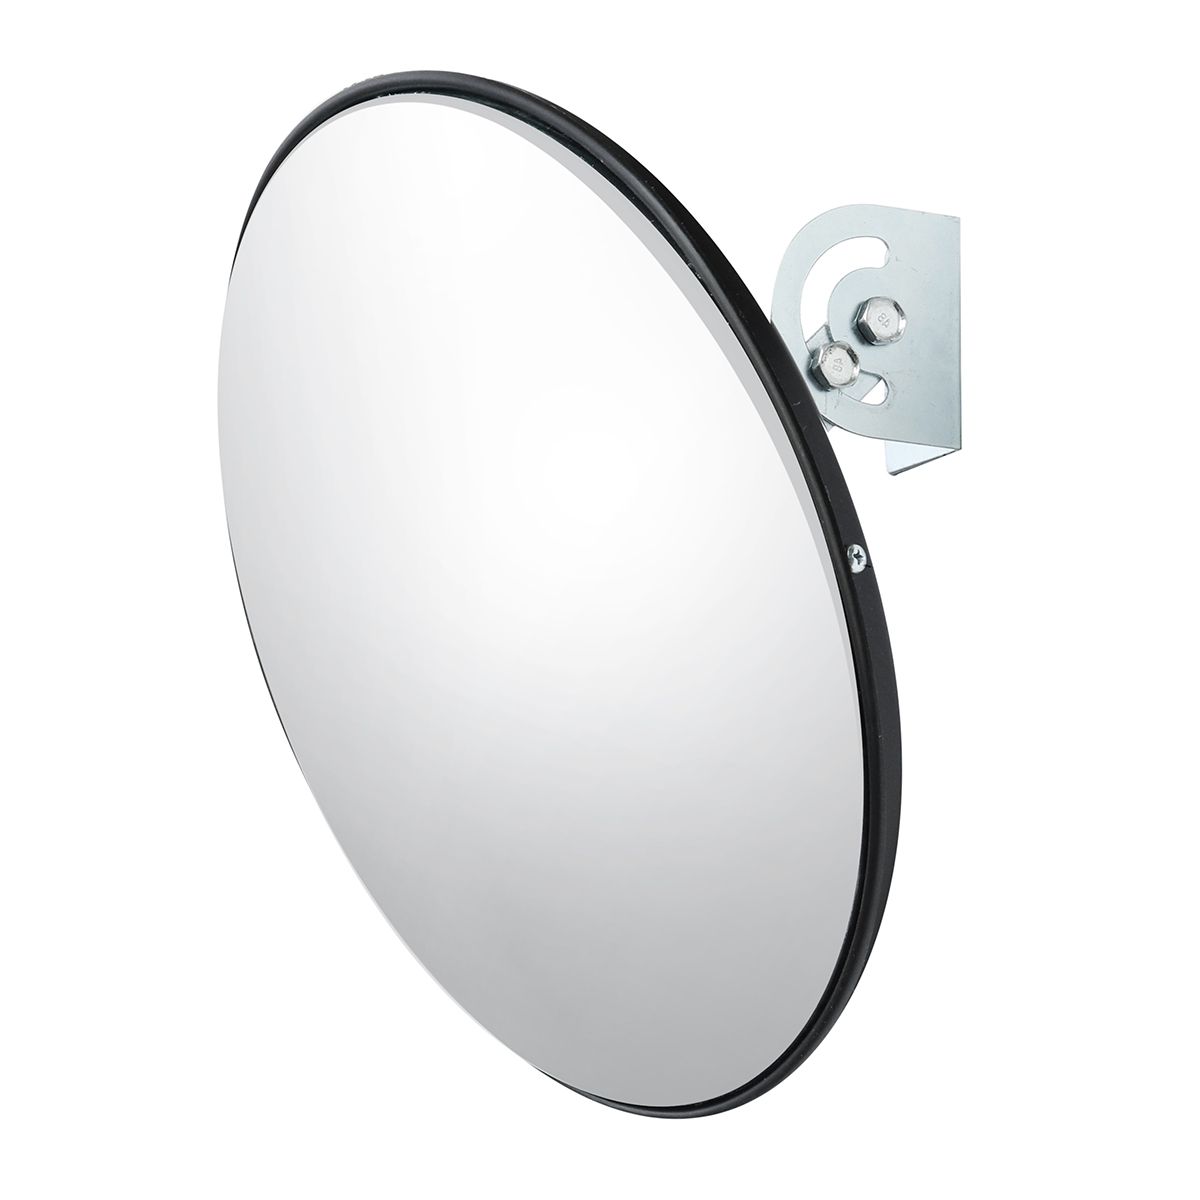 30cm-Wide-Angle-Security-Curved-Convex-Road-Traffic-Mirrors-Safety-Driveway-1558892